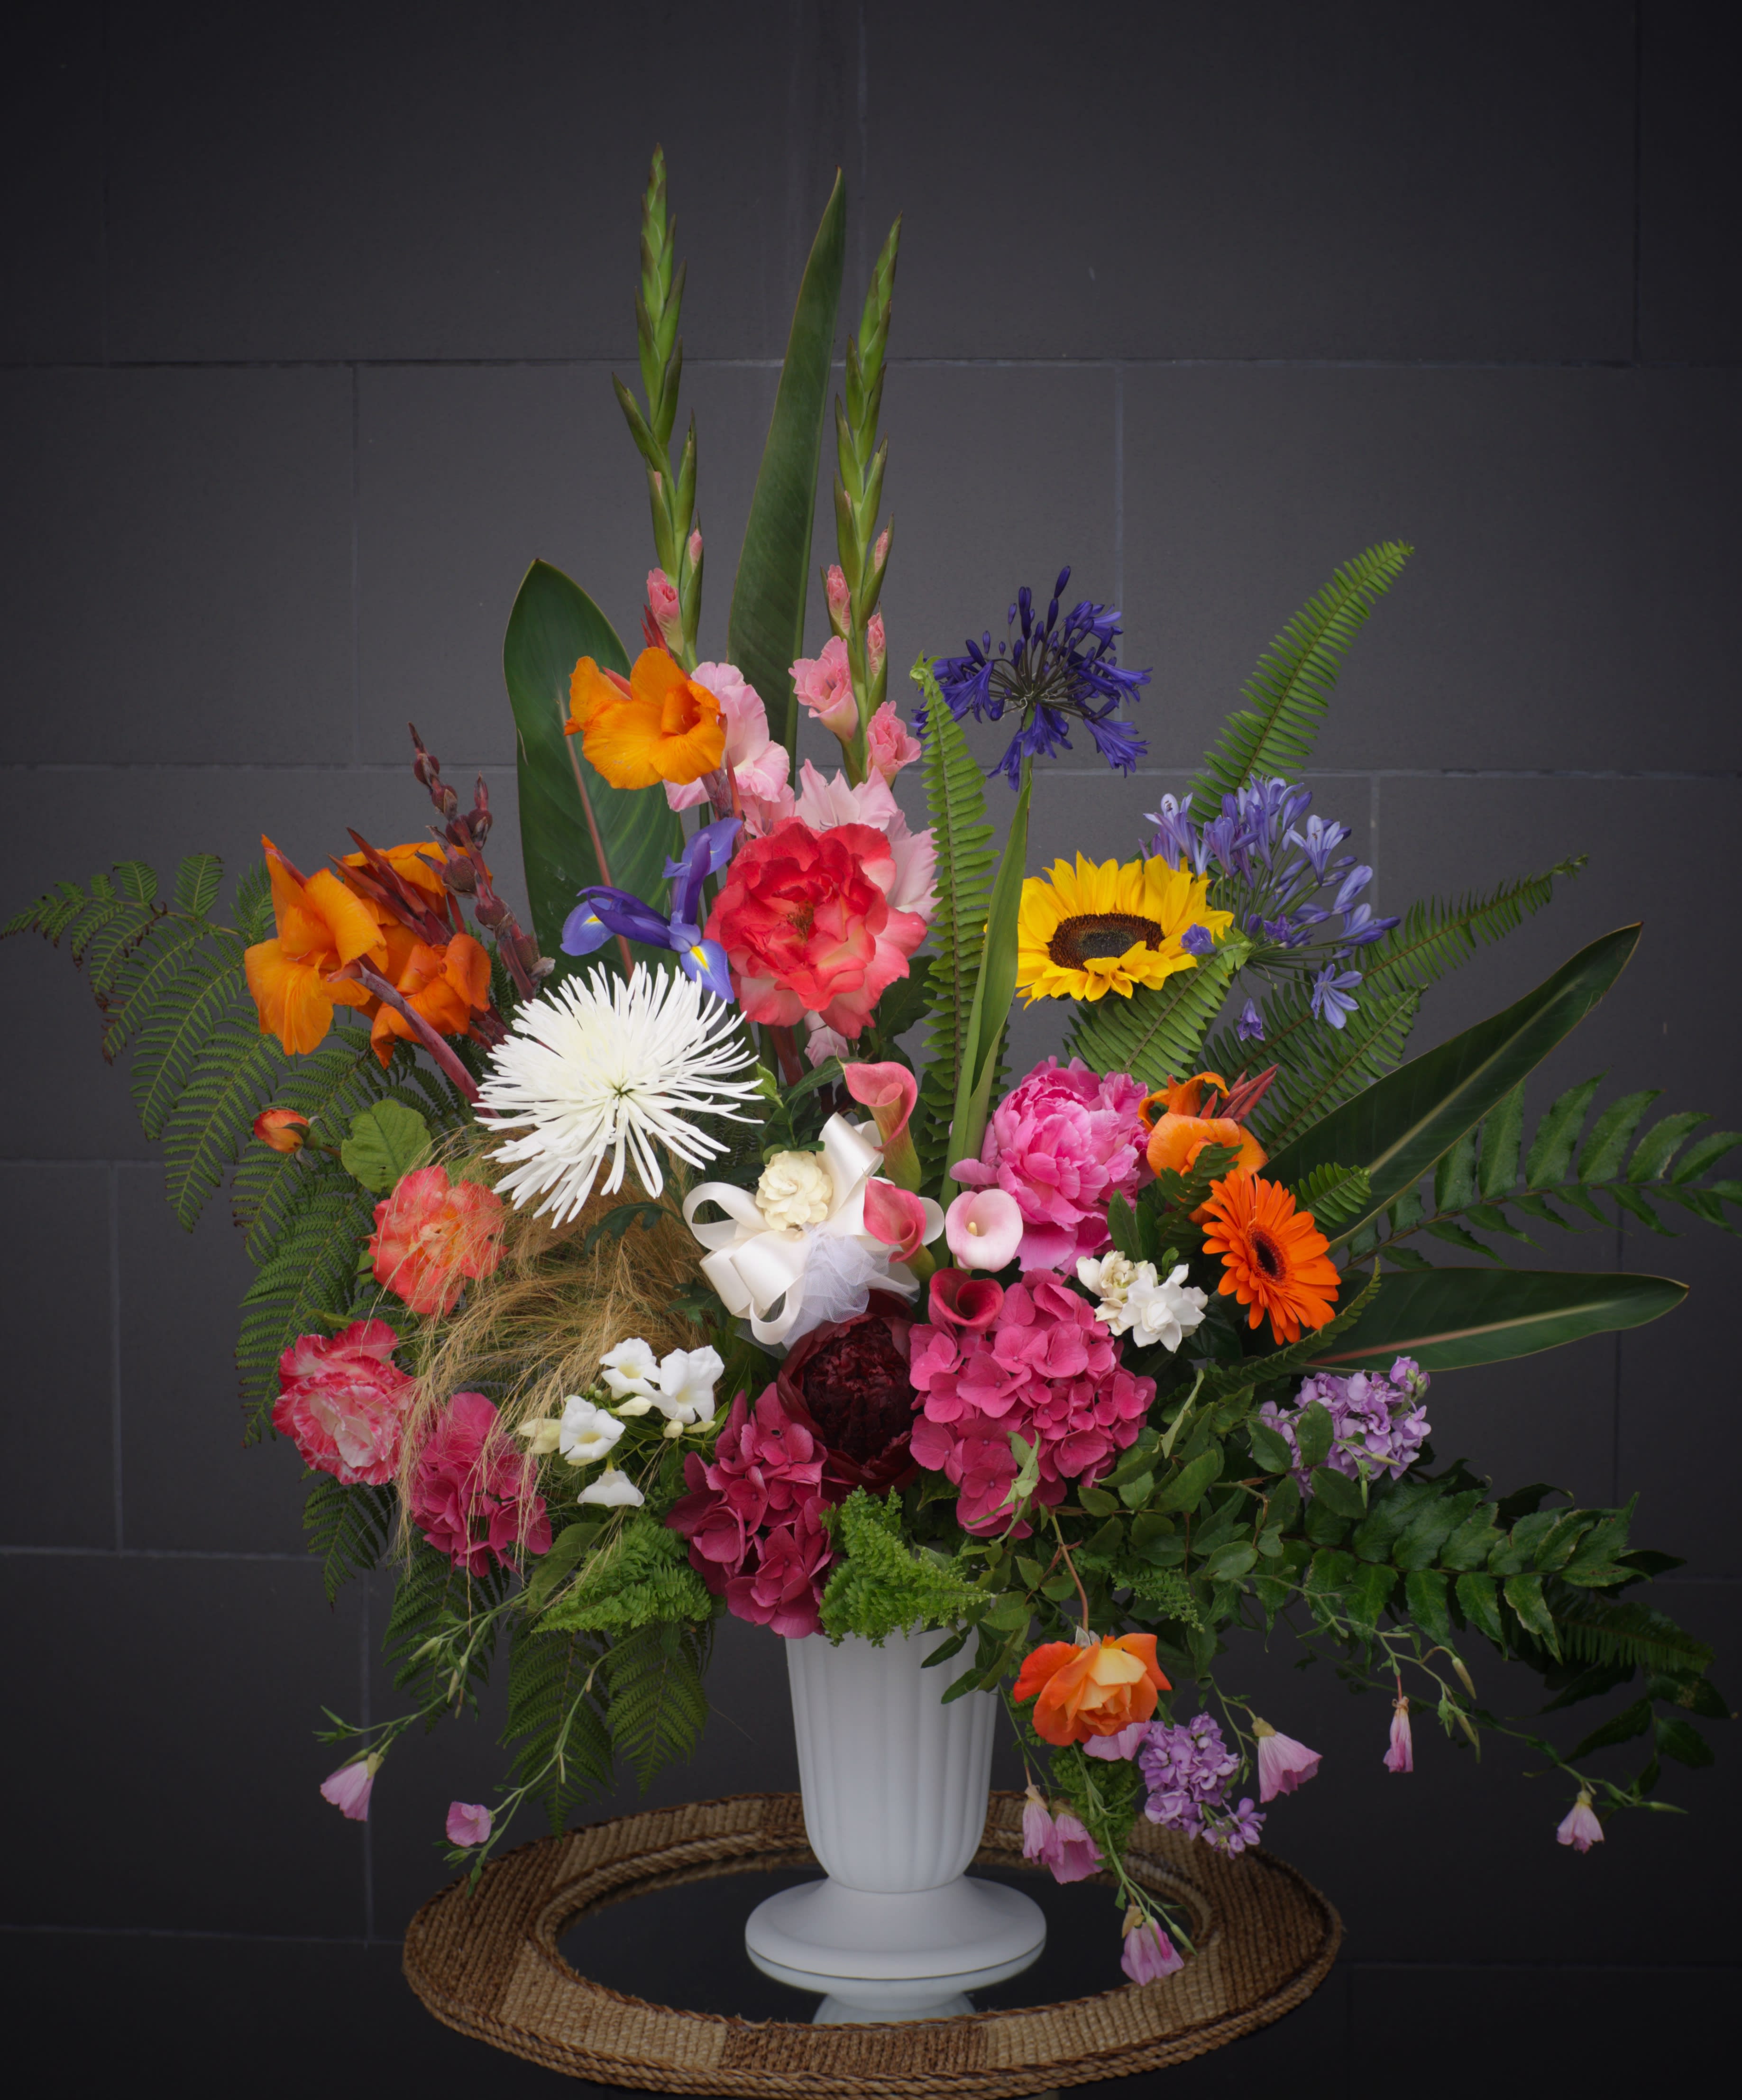 Blooming Beauty - Variety of beautiful and fragrant fresh flowers including rose, dahlia, freesia, orchid, sweet pea, hydrangea... and nice accents 